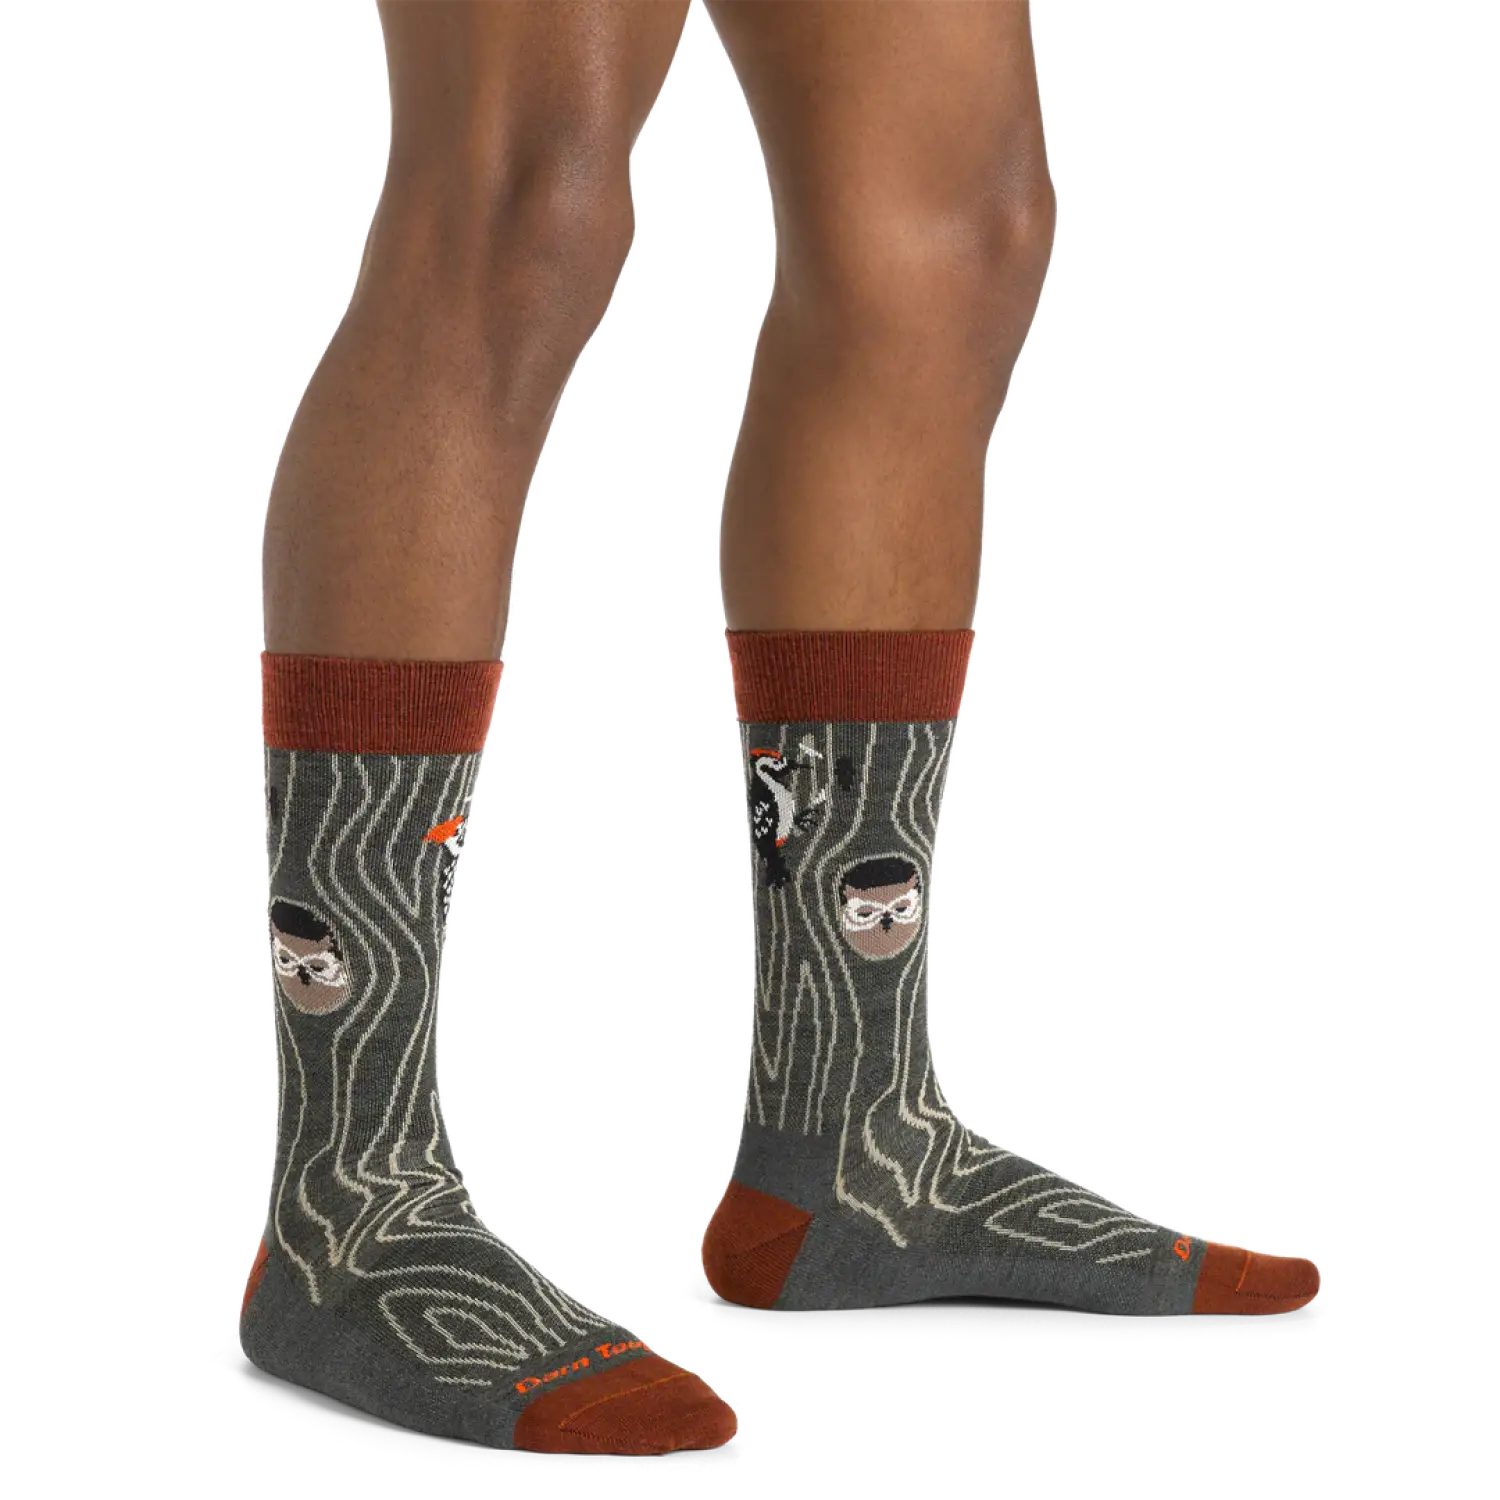 Darn Tough Men's Woody Crew Lightweight Lifestyle Sock shown in the Forest color option. Shown on model.